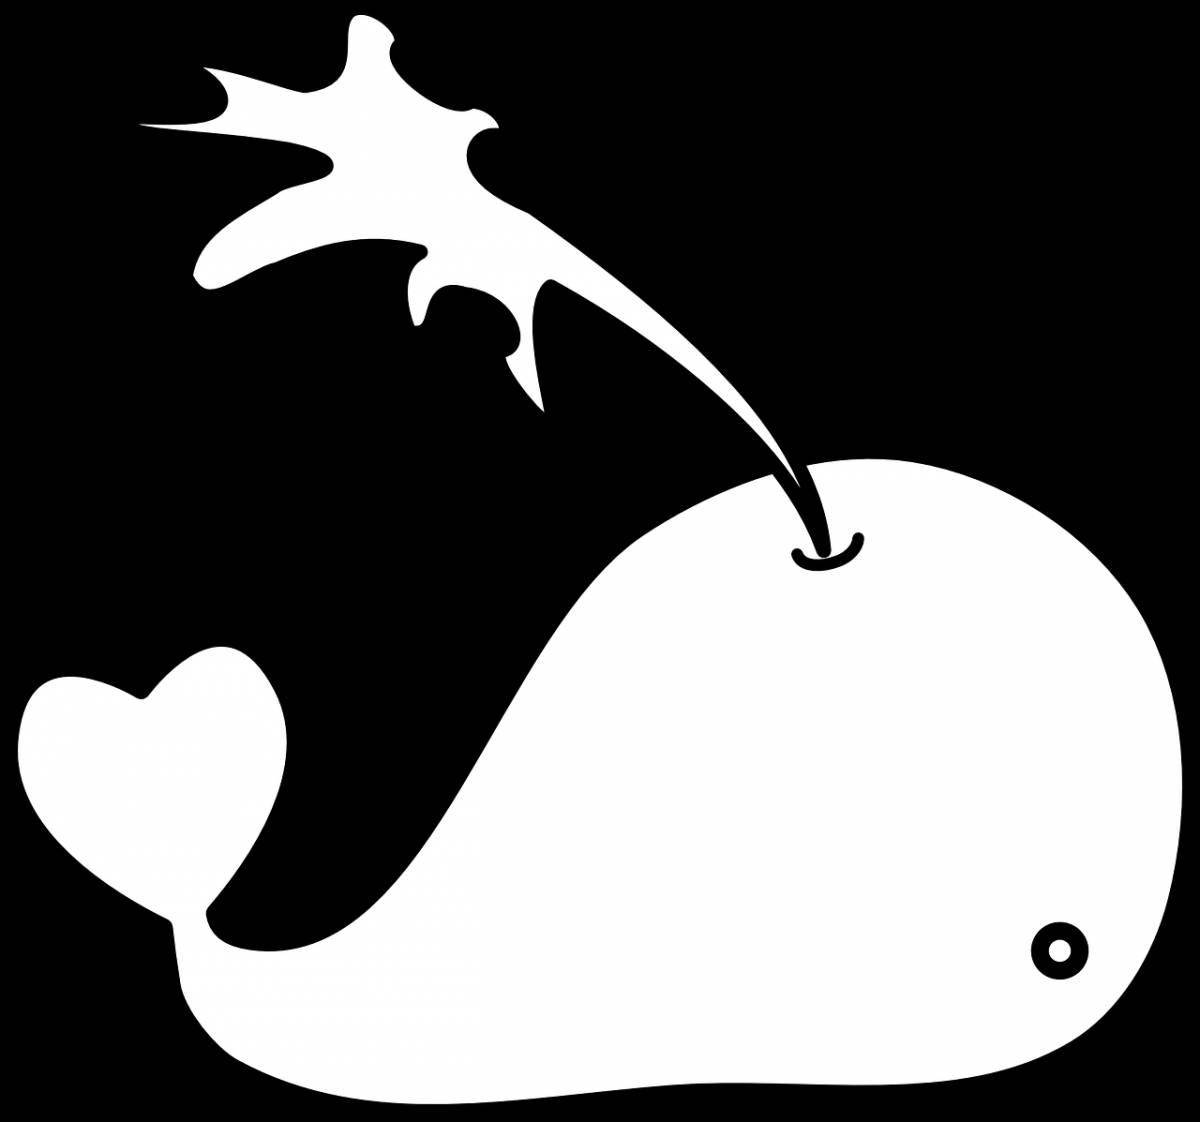 Awesome whale coloring page for kids